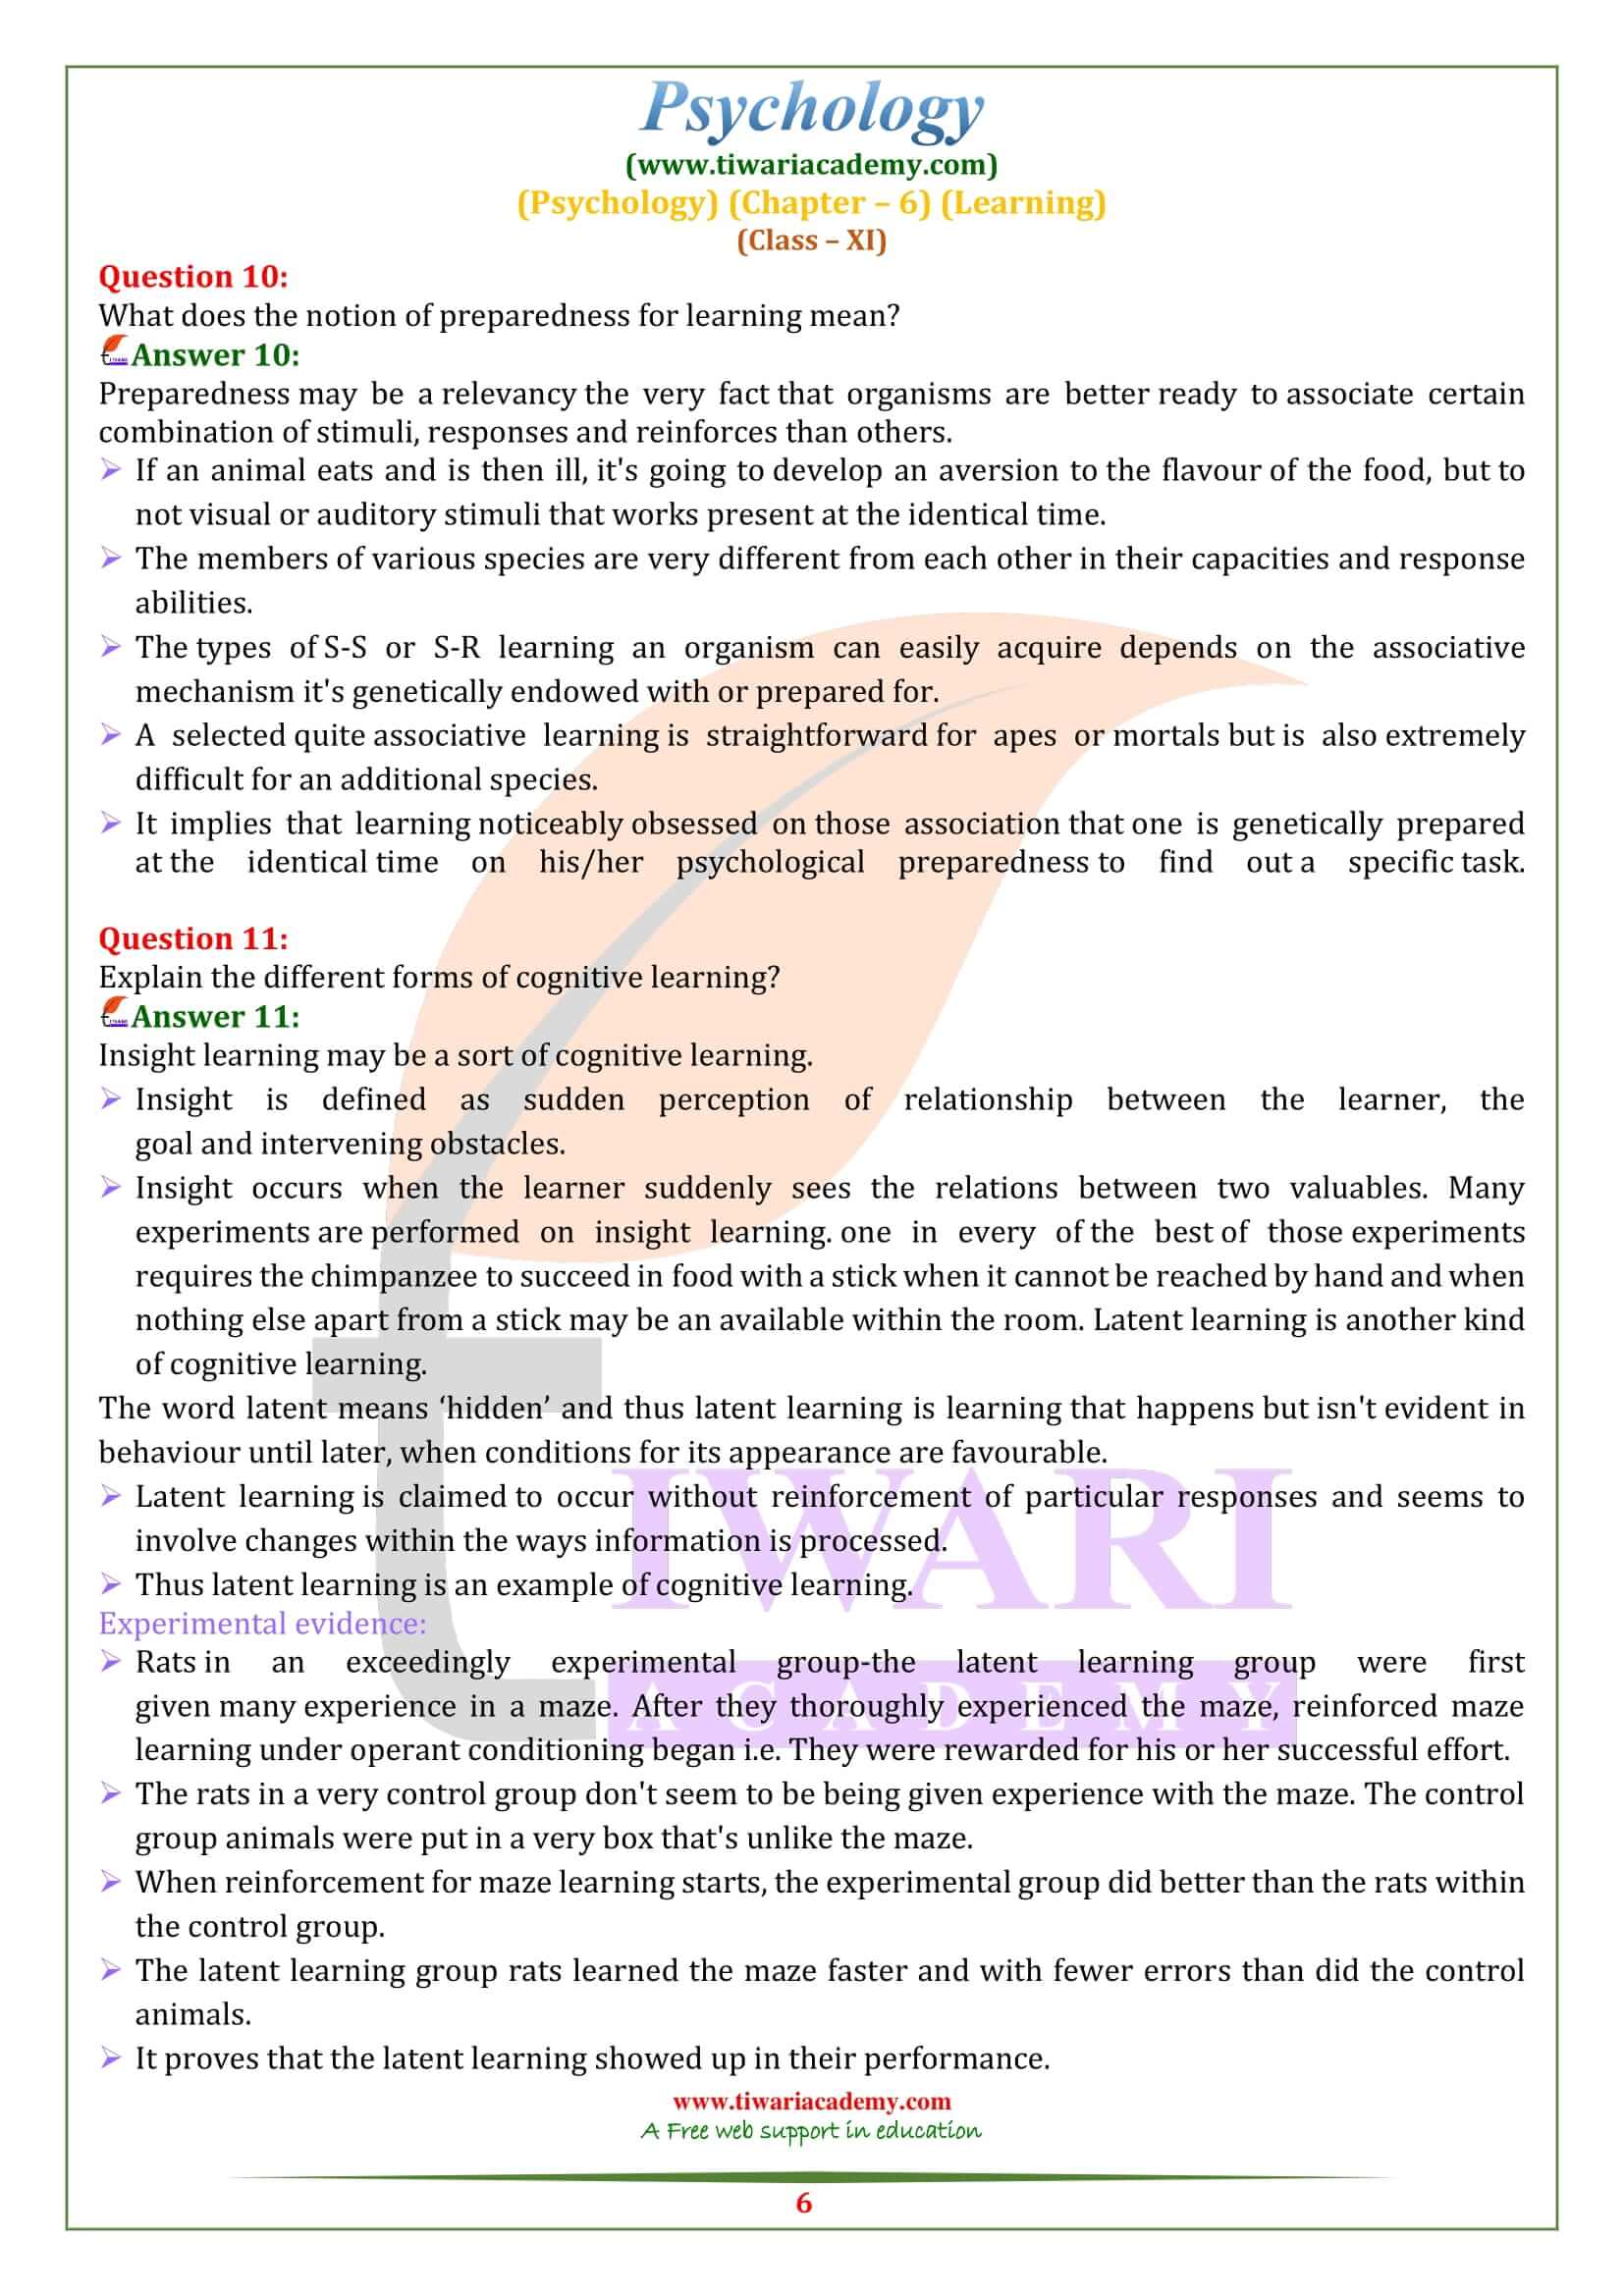 NCERT Solutions for Class 11 Psychology Chapter 6 Exercises